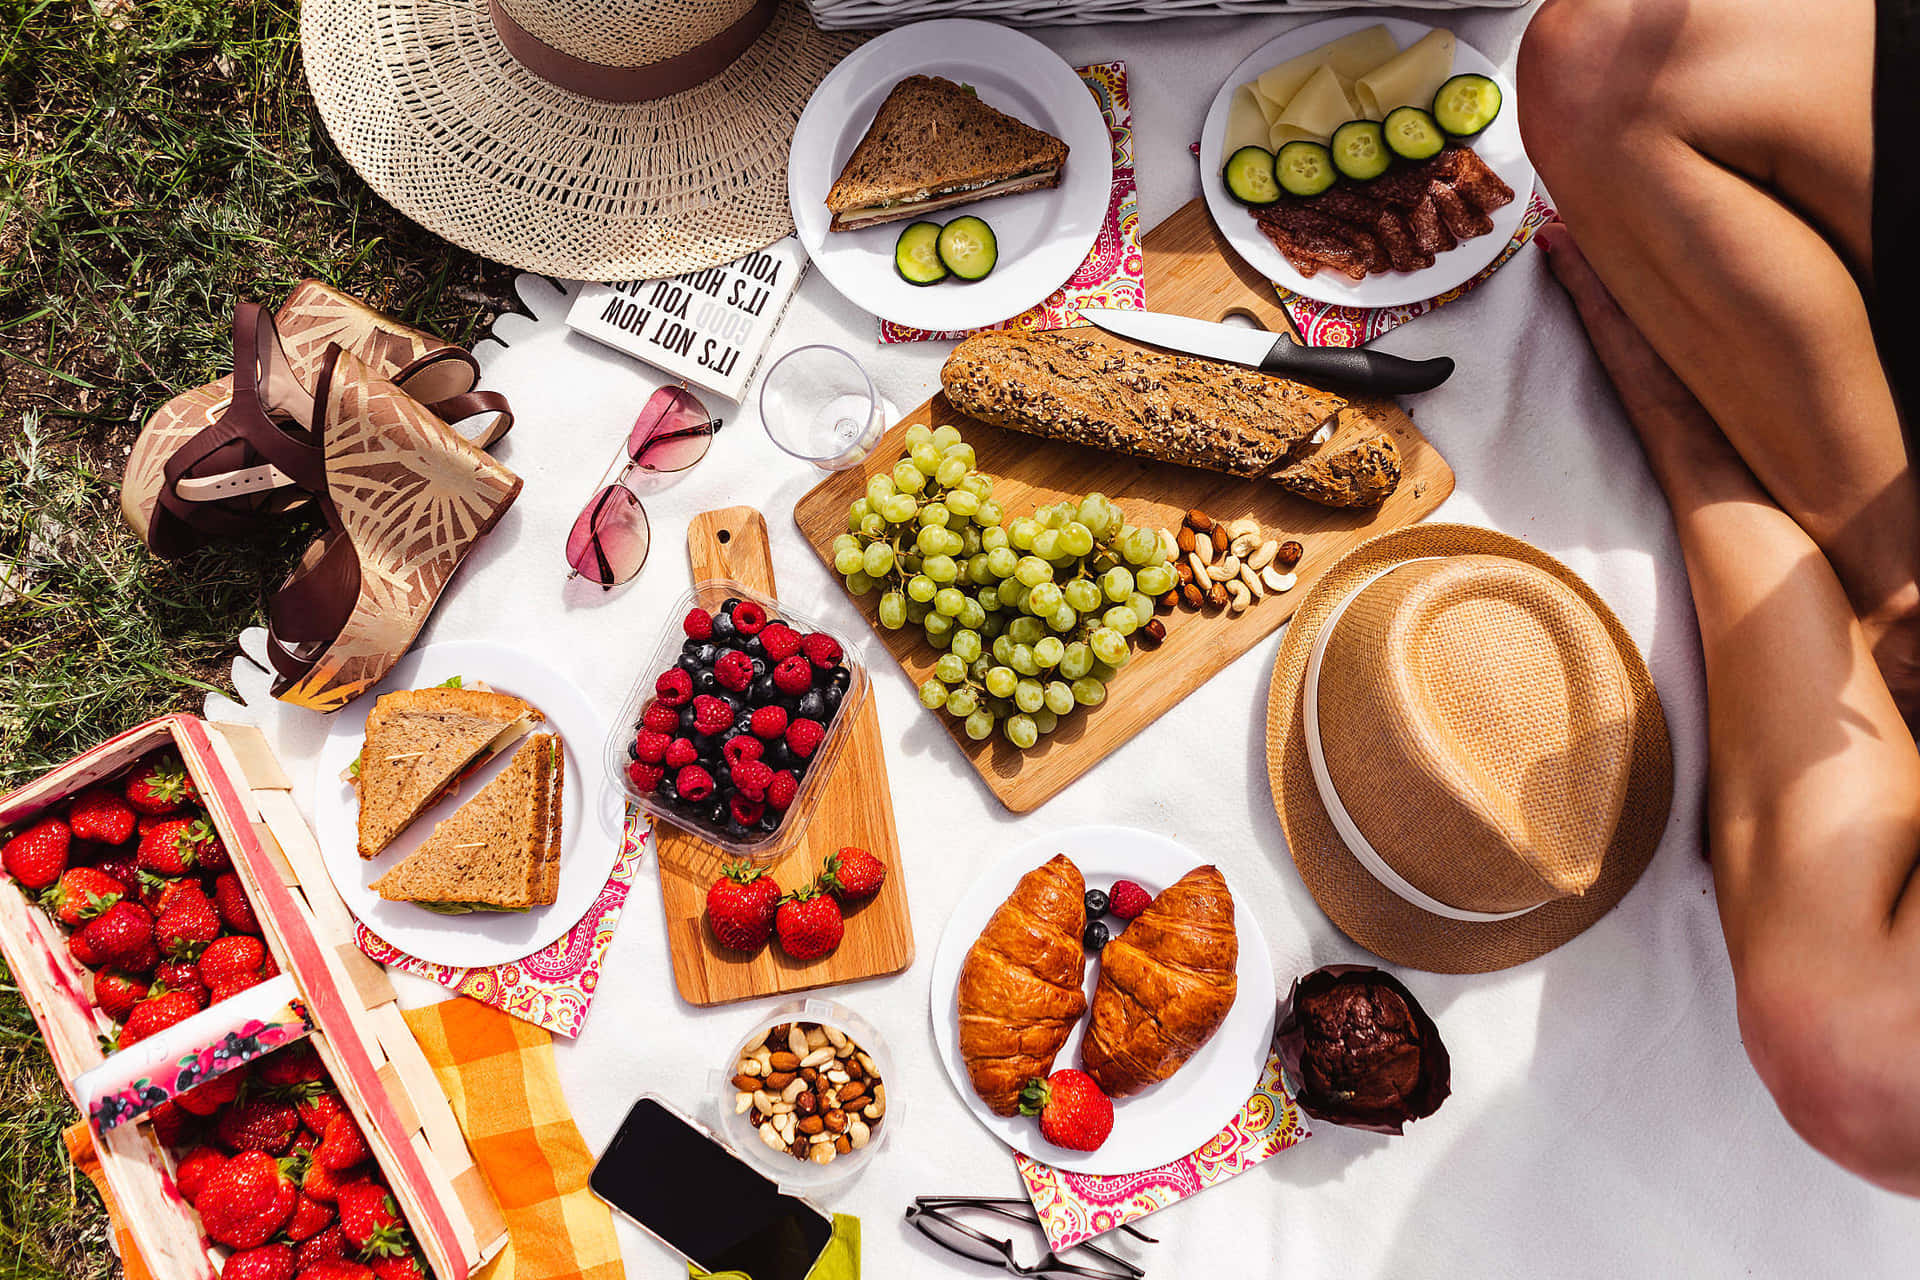 Picnic Set Up With Woman's Sandals Picture